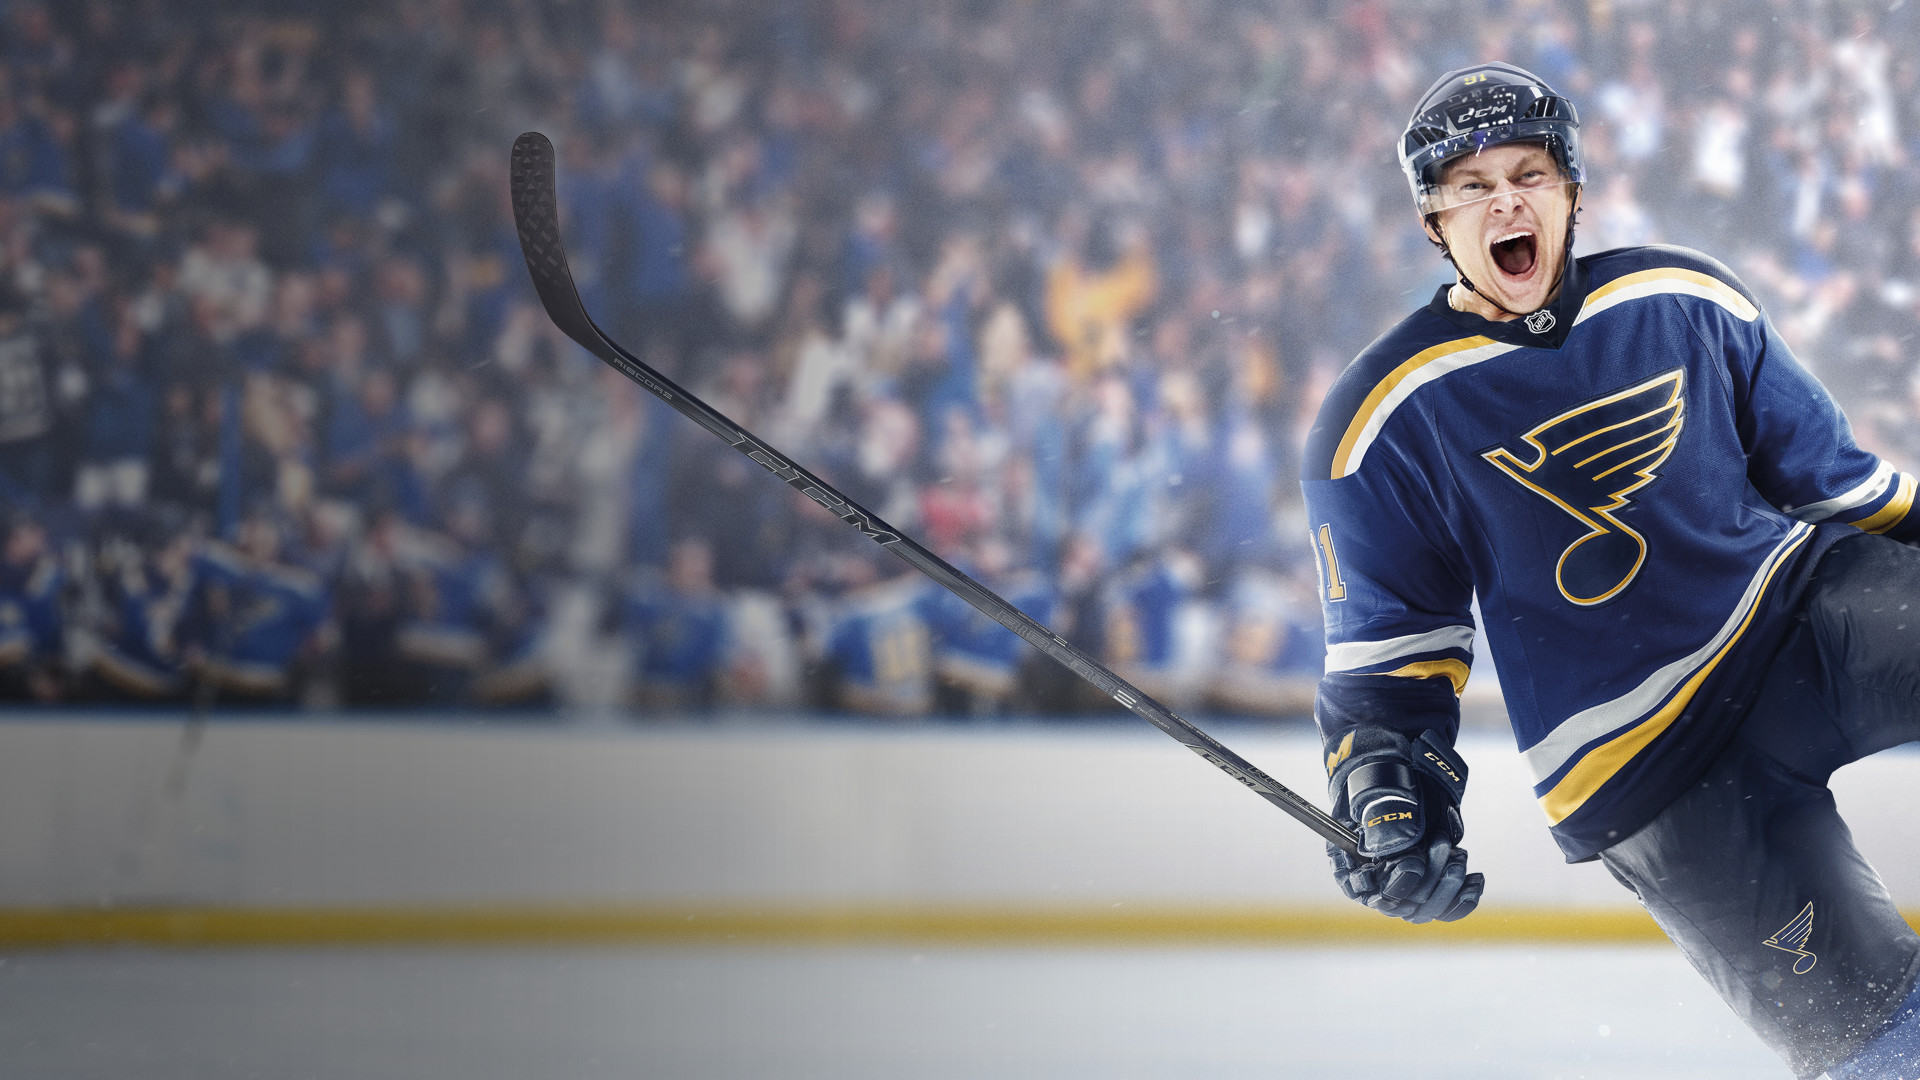 download nhl 17 xbox one for free